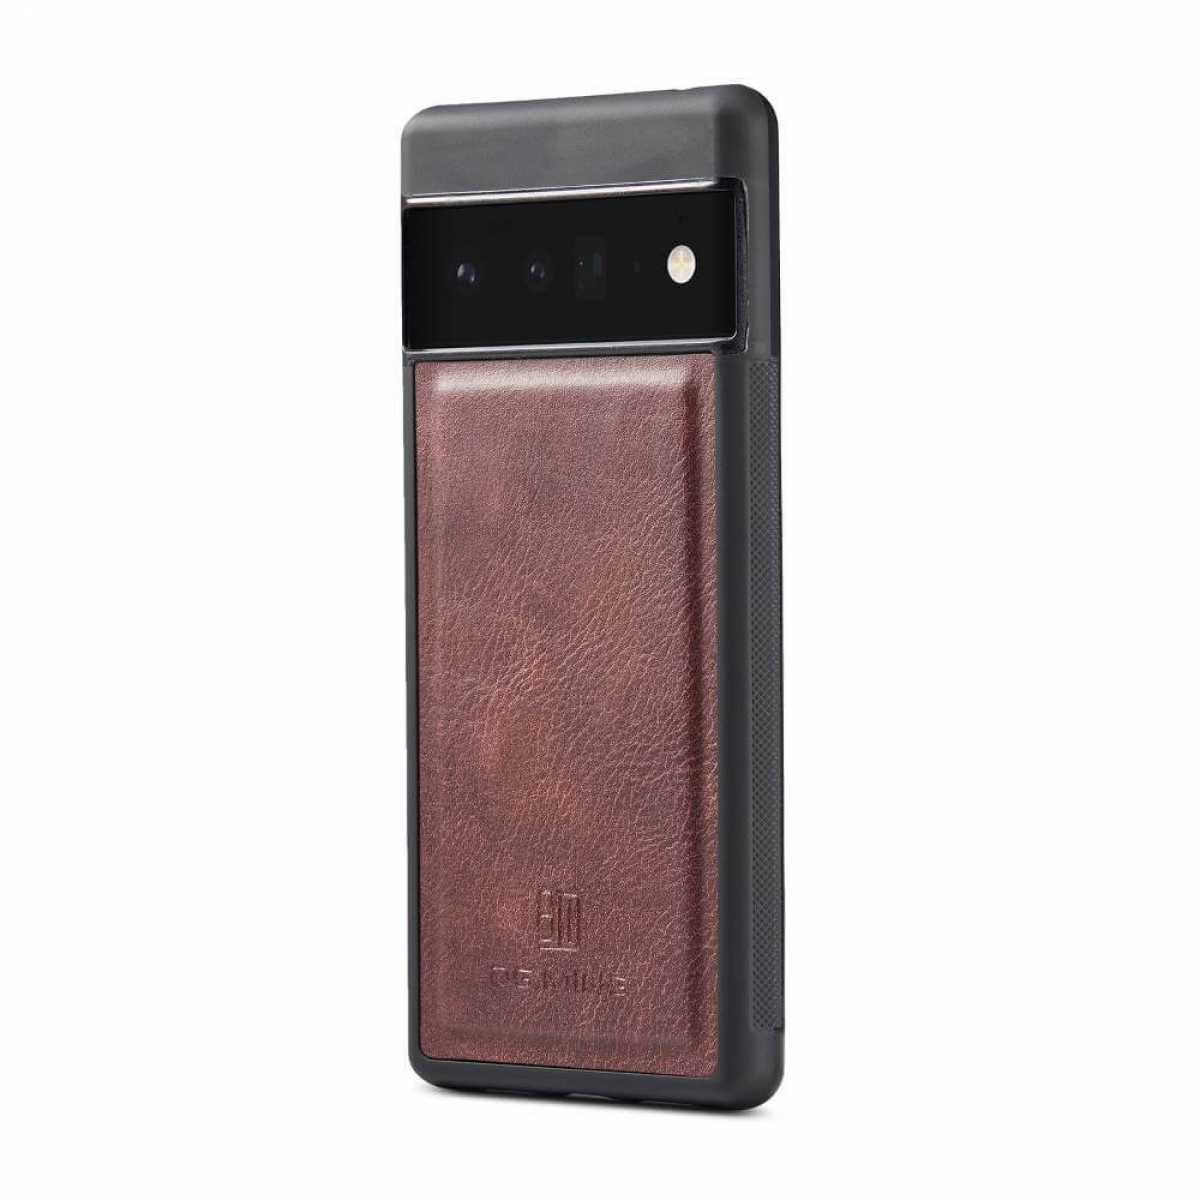 6 MING Pro, 2in1, Google, DG Rot Pixel Bookcover,